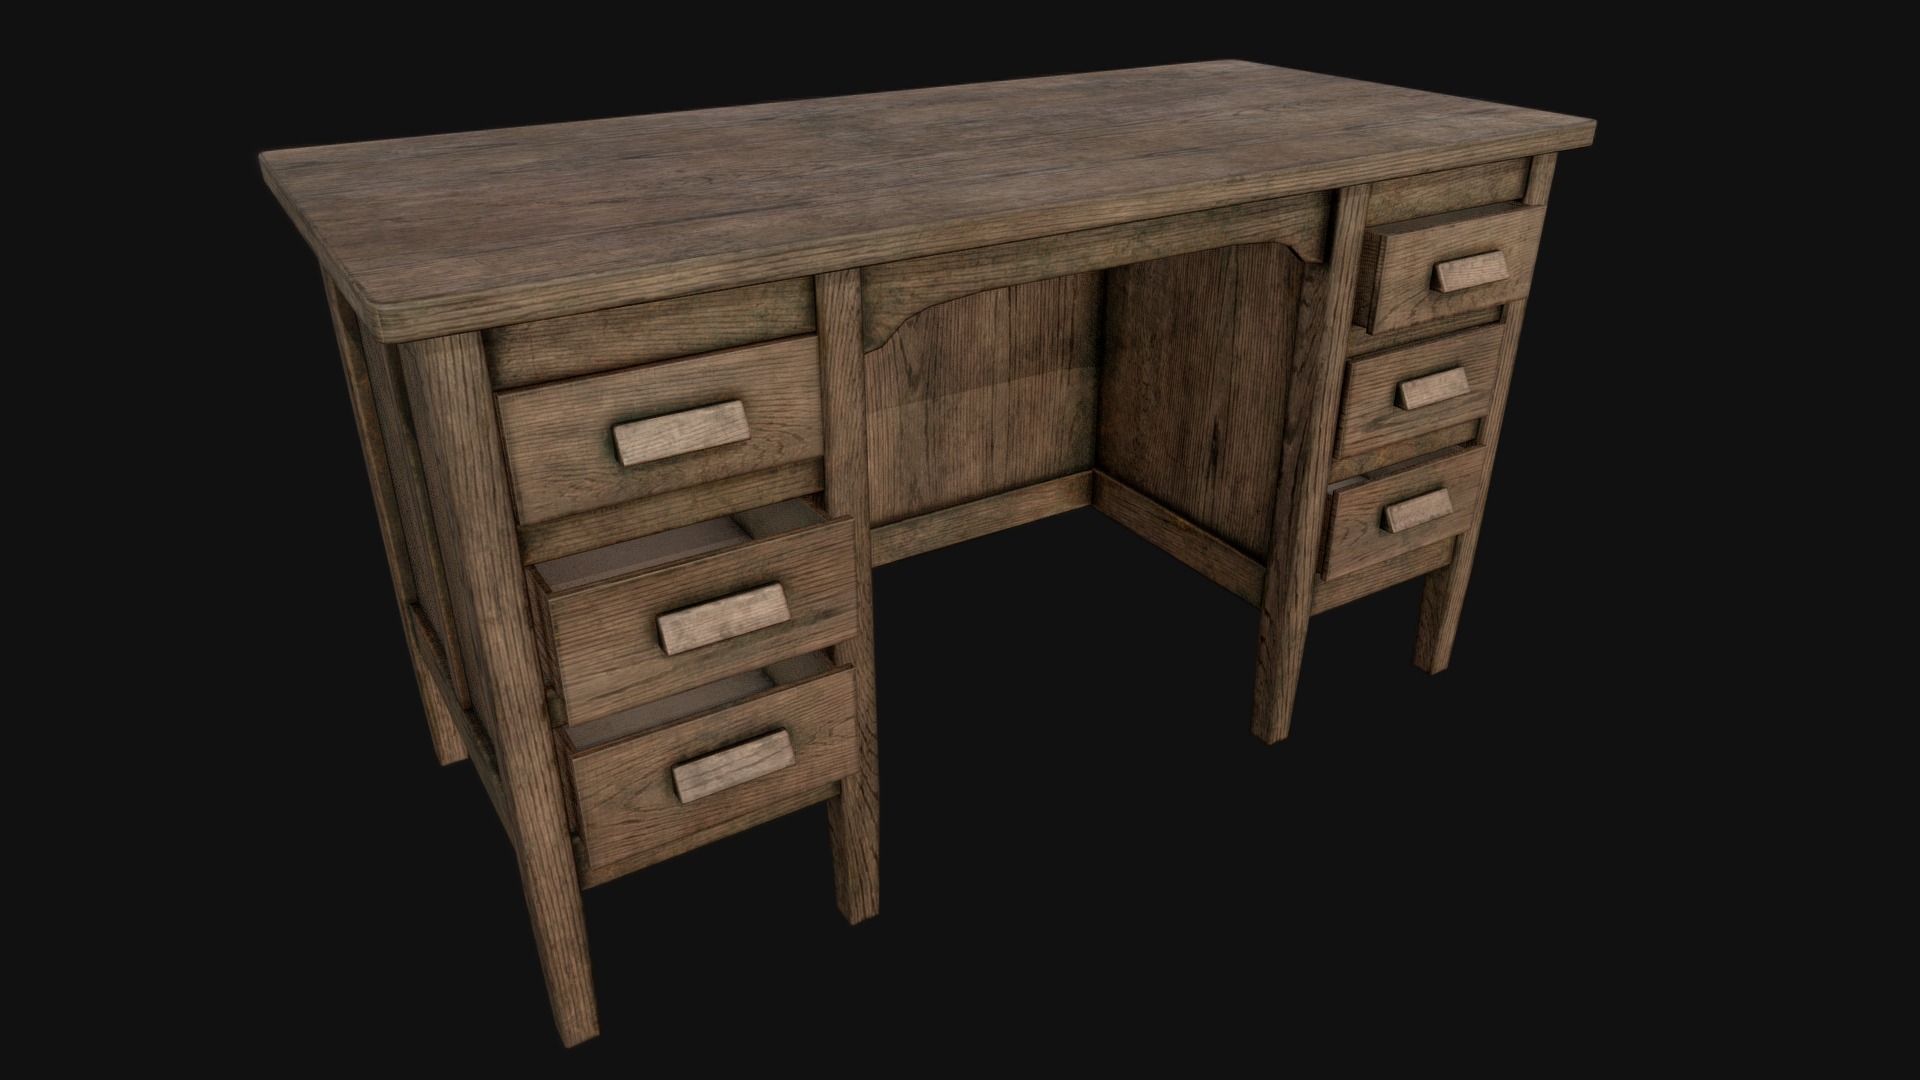 3D model Old Office Table A – PBR - This is a 3D model of the Old Office Table A - PBR. The 3D model is about a wooden table with drawers.